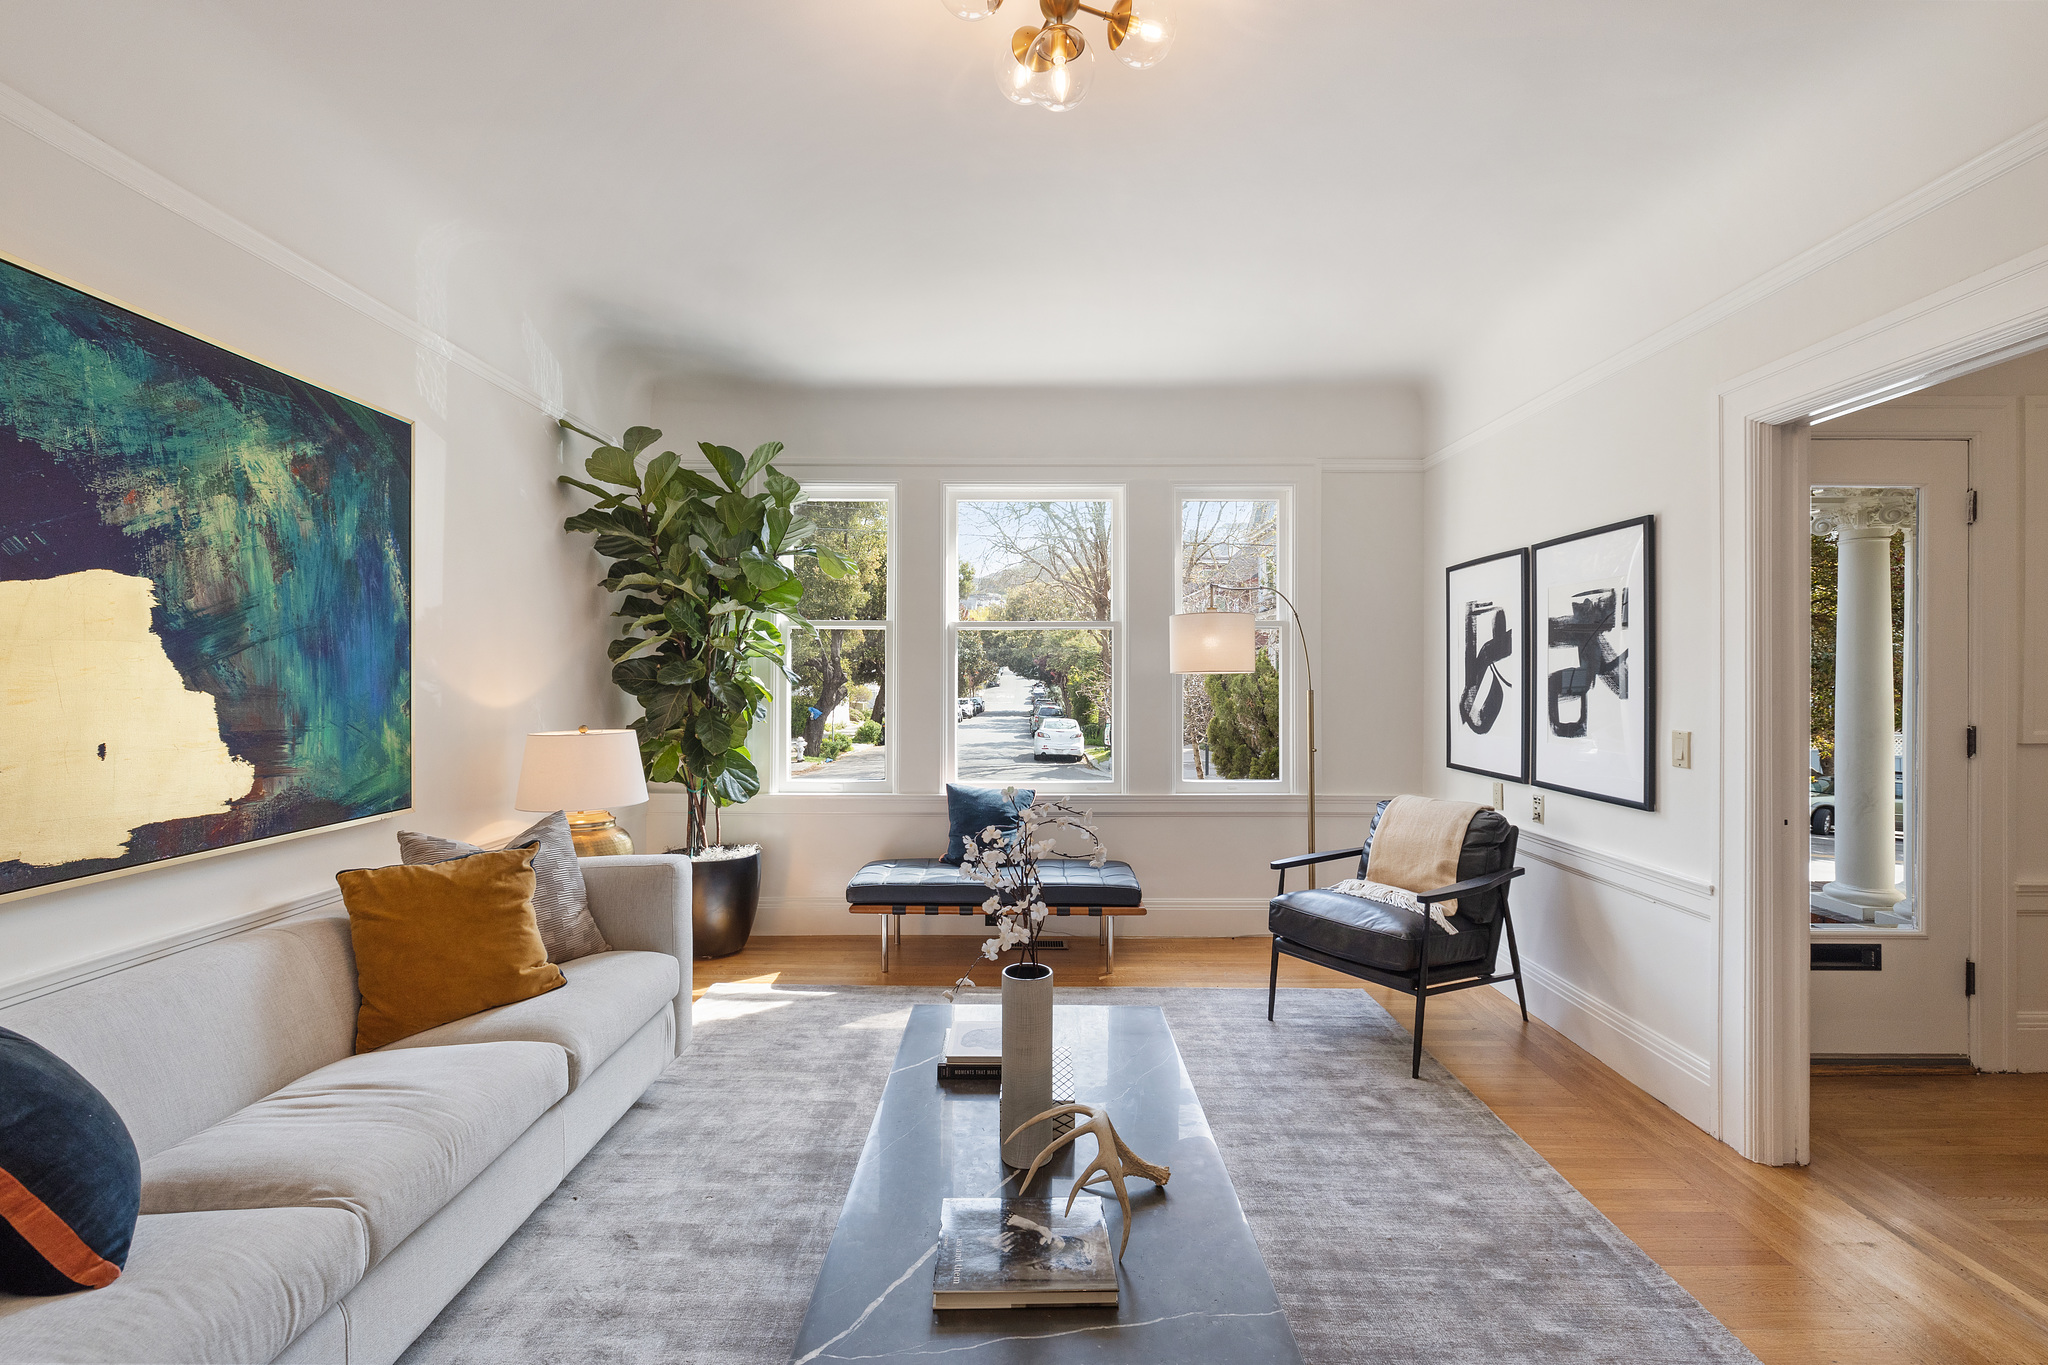 Property Photo: Living room with white wood trim